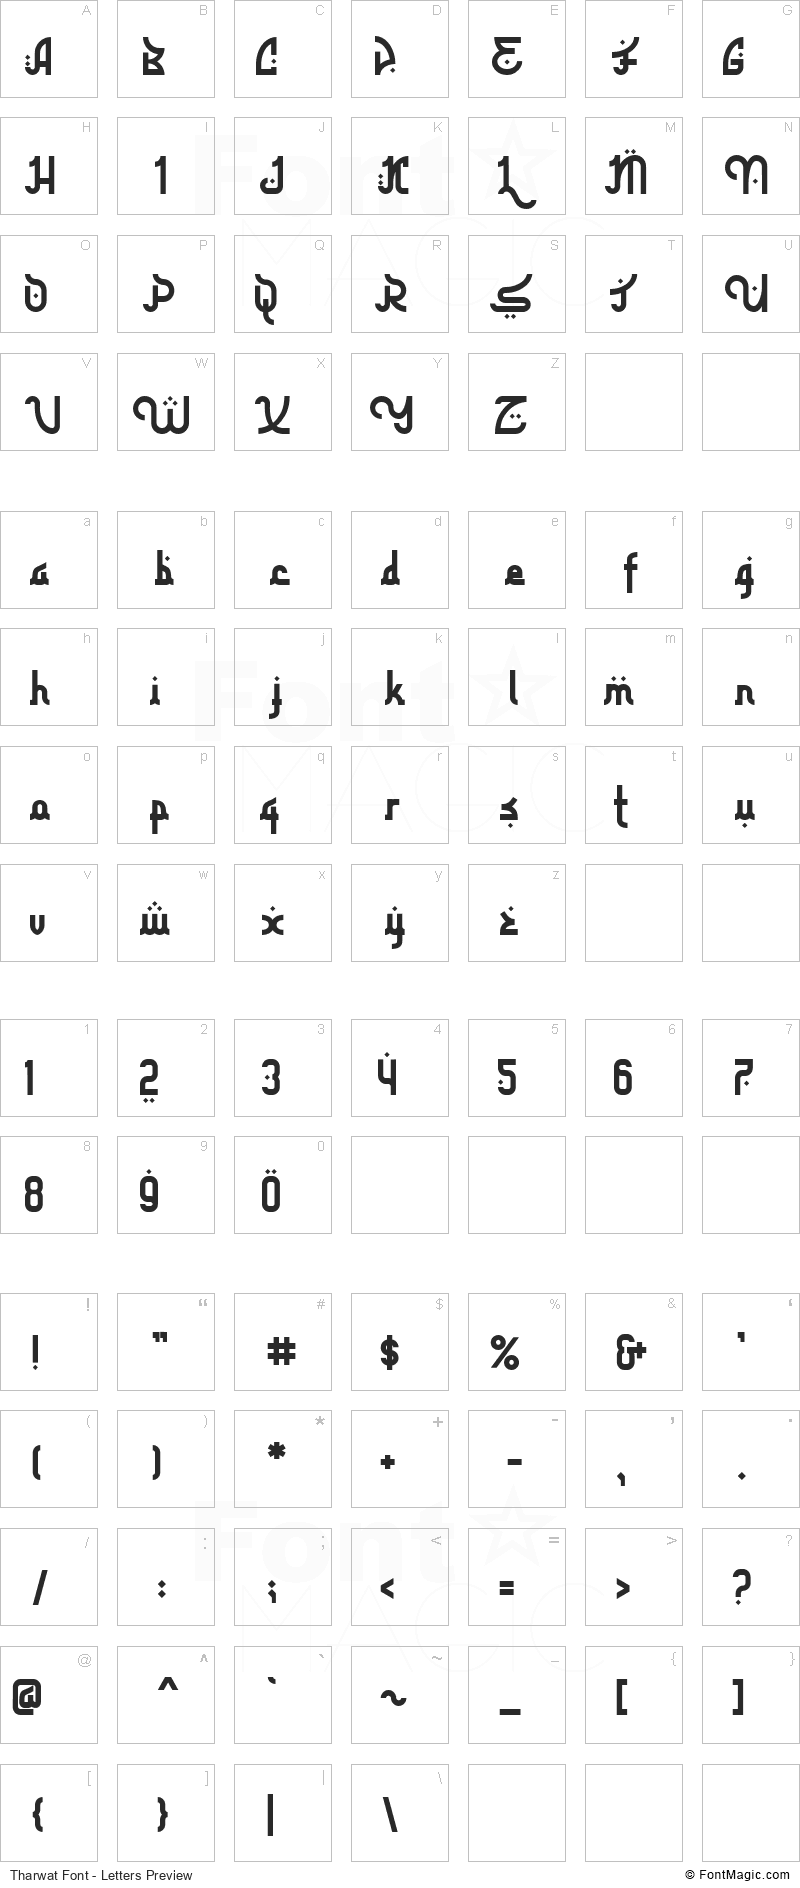 Tharwat Font - All Latters Preview Chart